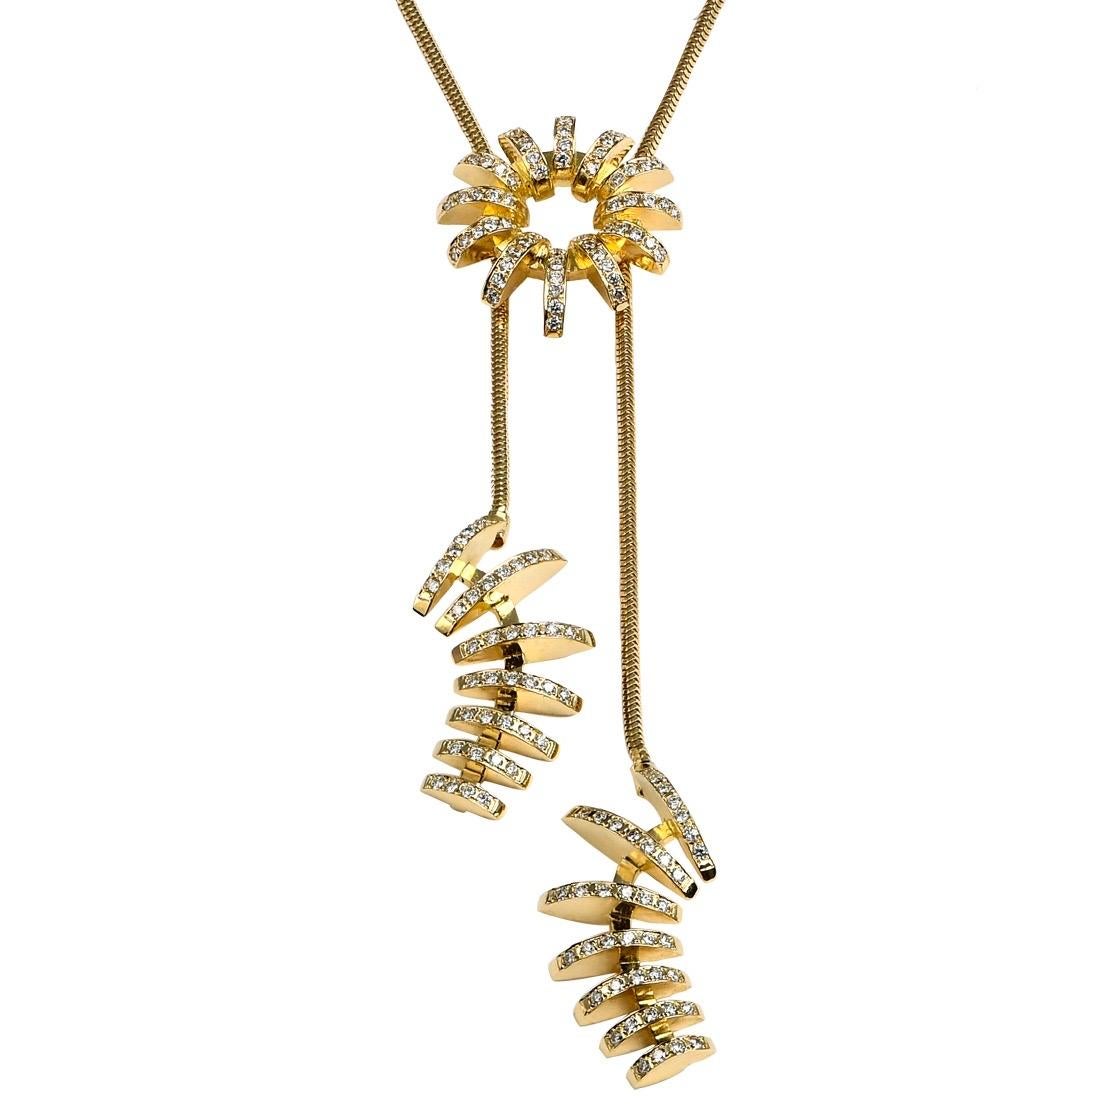 The 'Overflow' sautoir necklace is crafted in 18k gold, hallmarked in Cyprus. This stunning, contemporary sautoir comprises three individual pieces set with diamonds held together be a snake chain. The necklace features a box and tongue fastening